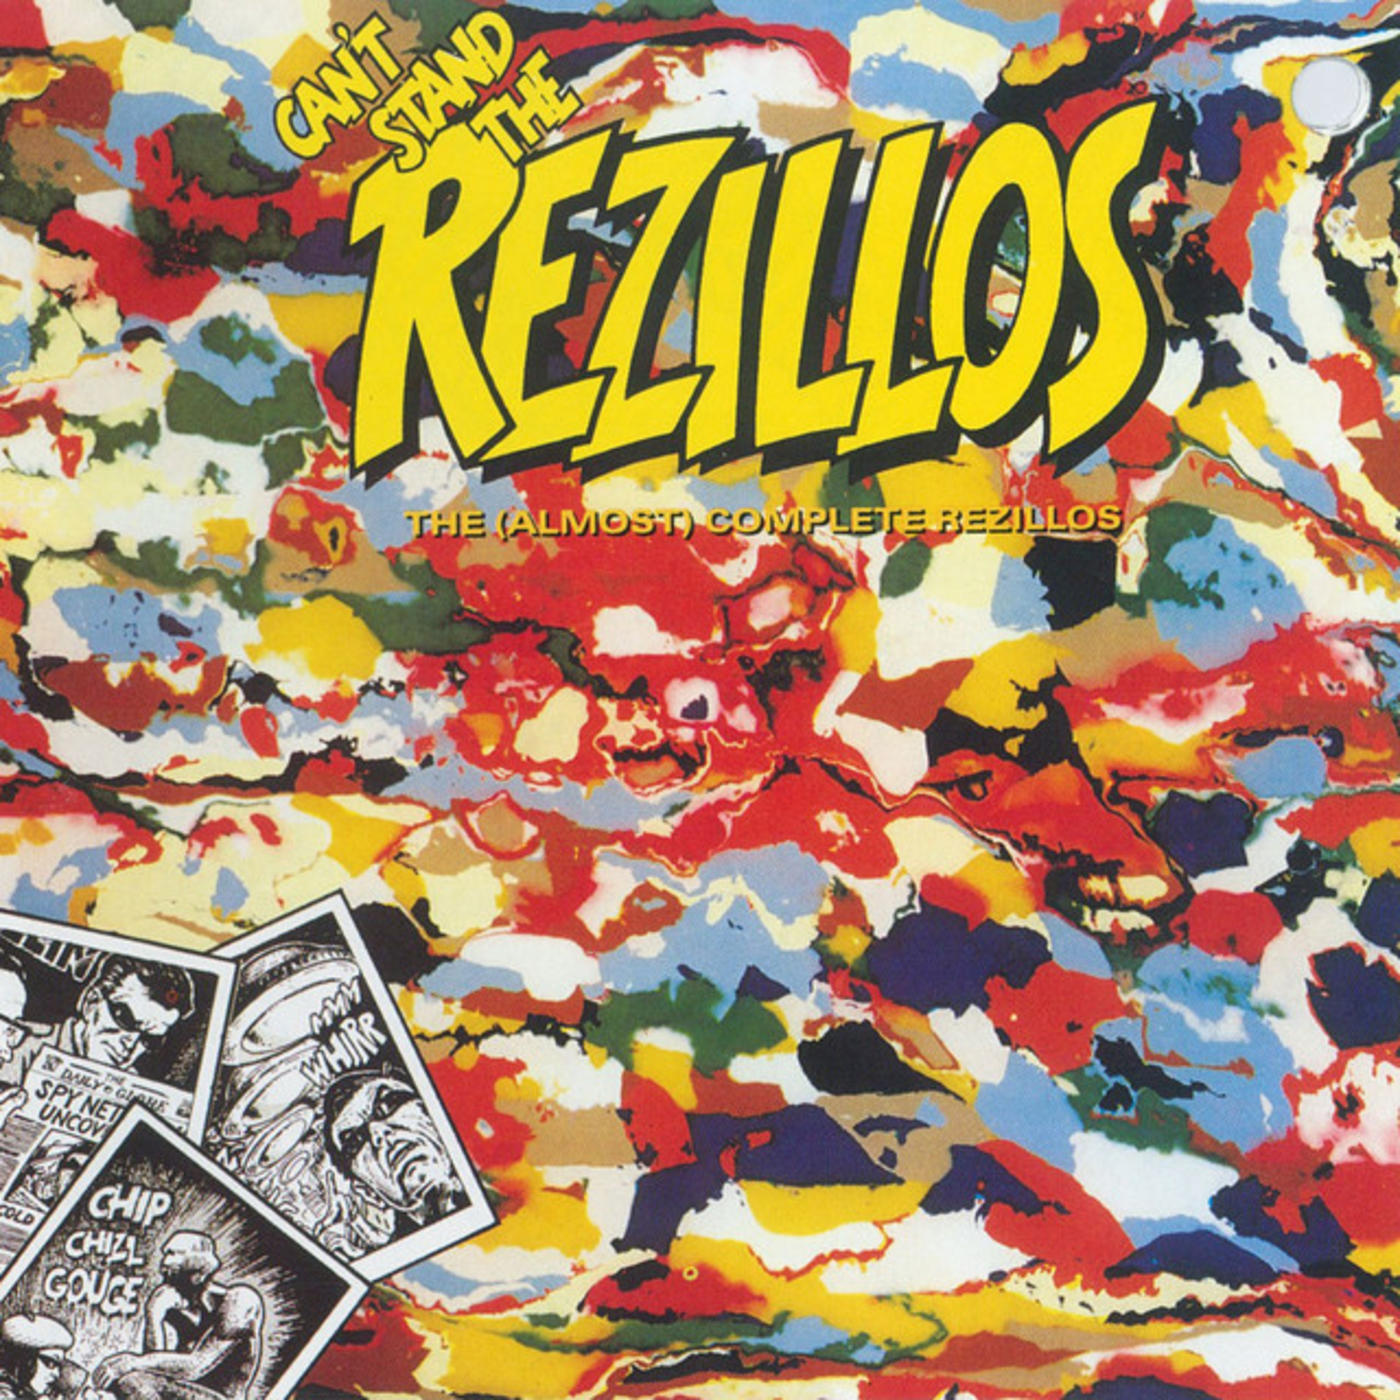 Can't Stand The Rezillos: The [Almost] Complete Rezillos